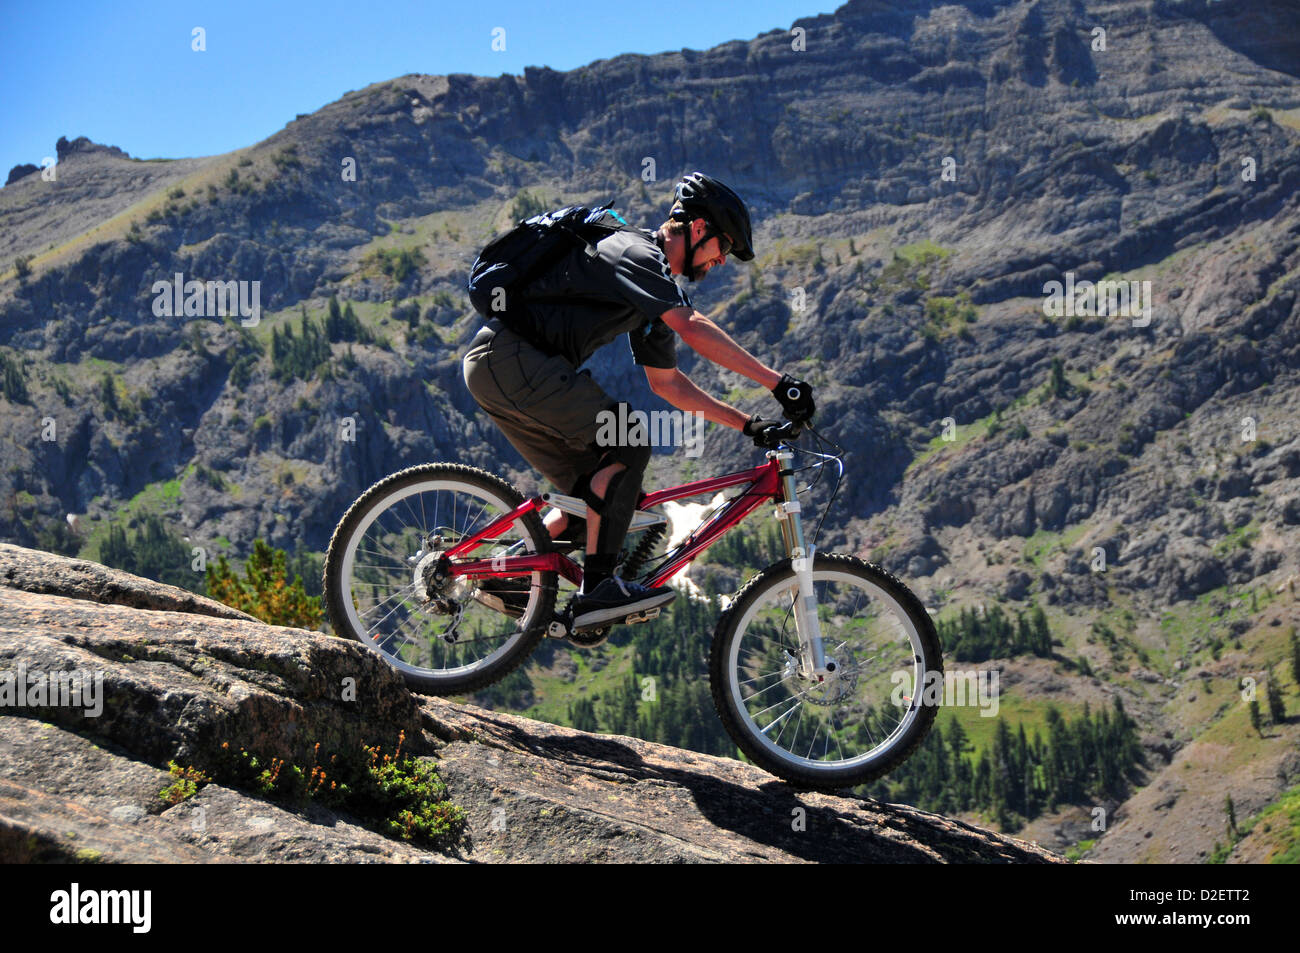 A mountain biker rides down a technical section of rock at Kirkwood Mountain Resort in the summer, CA. Stock Photo